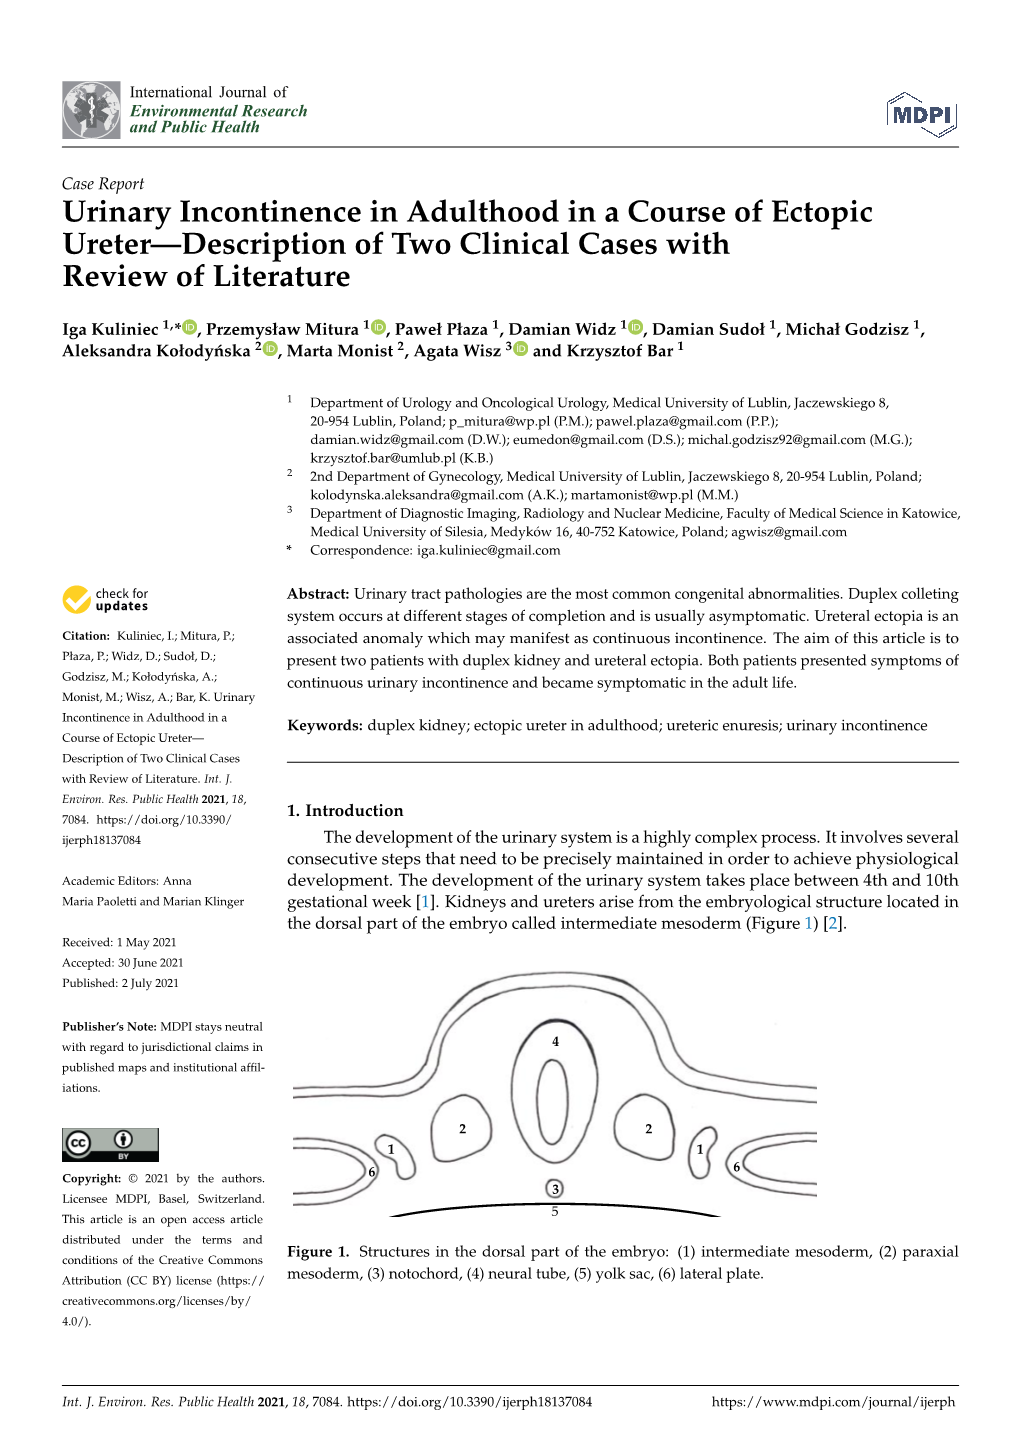 Urinary Incontinence in Adulthood in a Course of Ectopic Ureter—Description of Two Clinical Cases with Review of Literature